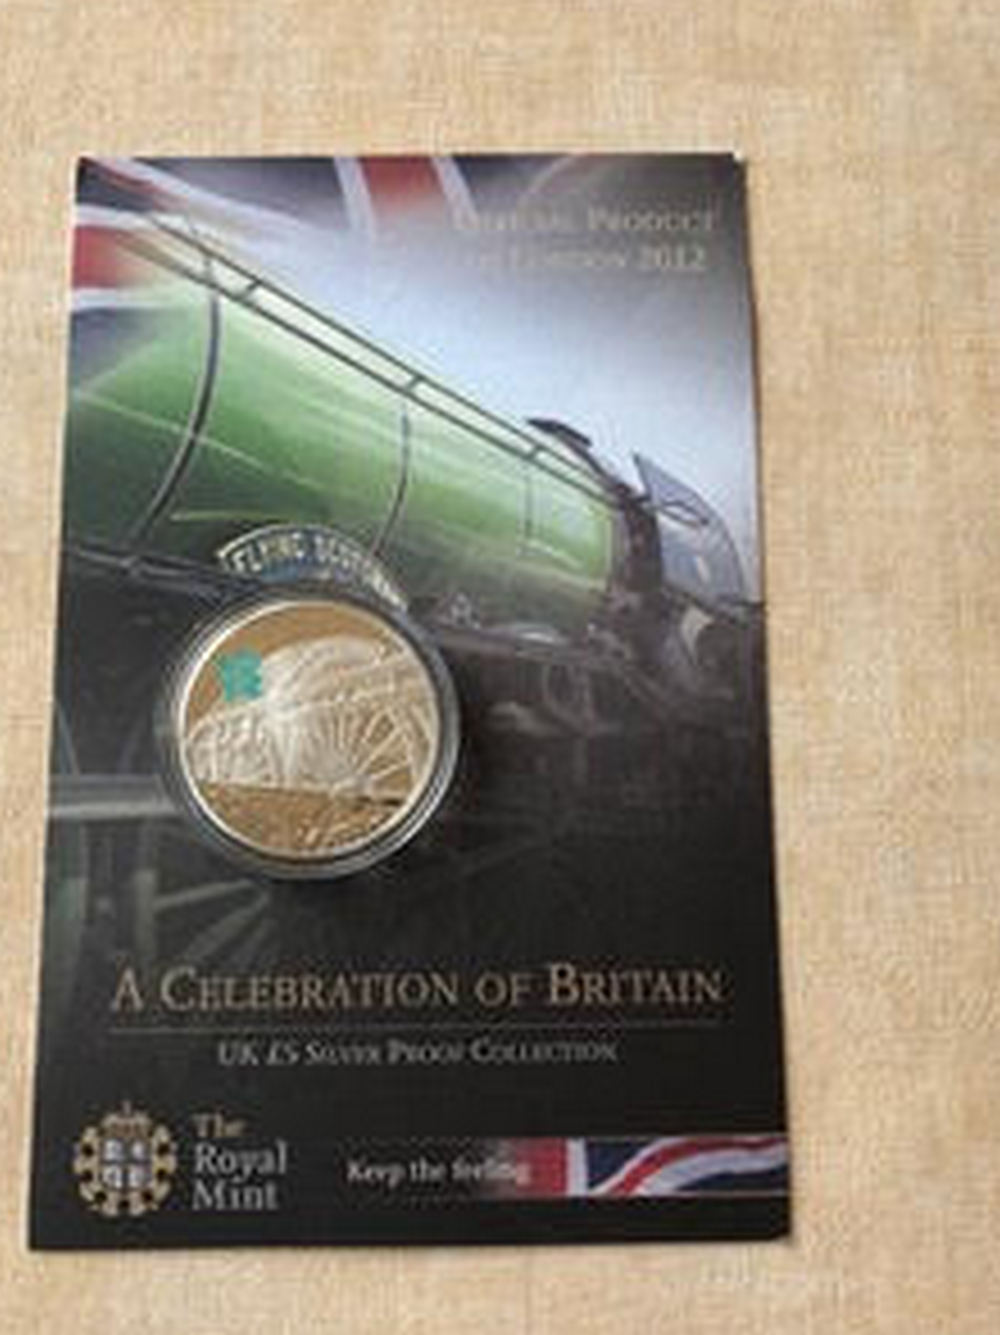 A 2009 £5 sterling 925 silver proof coin, weight 28.28g, in a protective case.